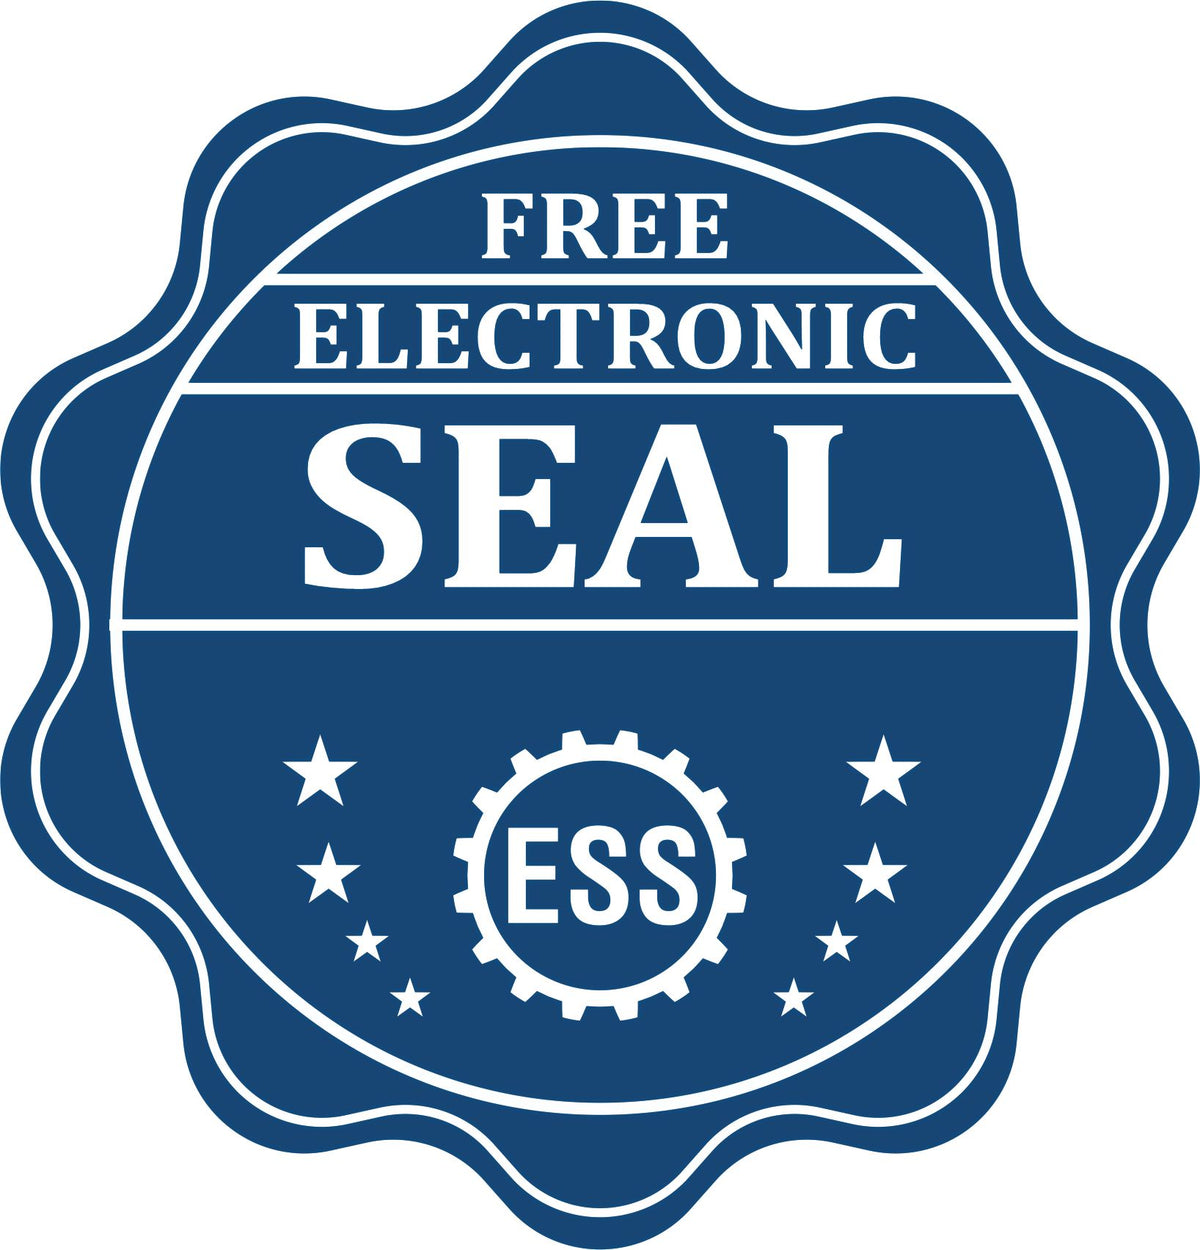 A badge showing a free electronic seal for the Gift Kansas Landscape Architect Seal with stars and the ESS gear on the emblem.